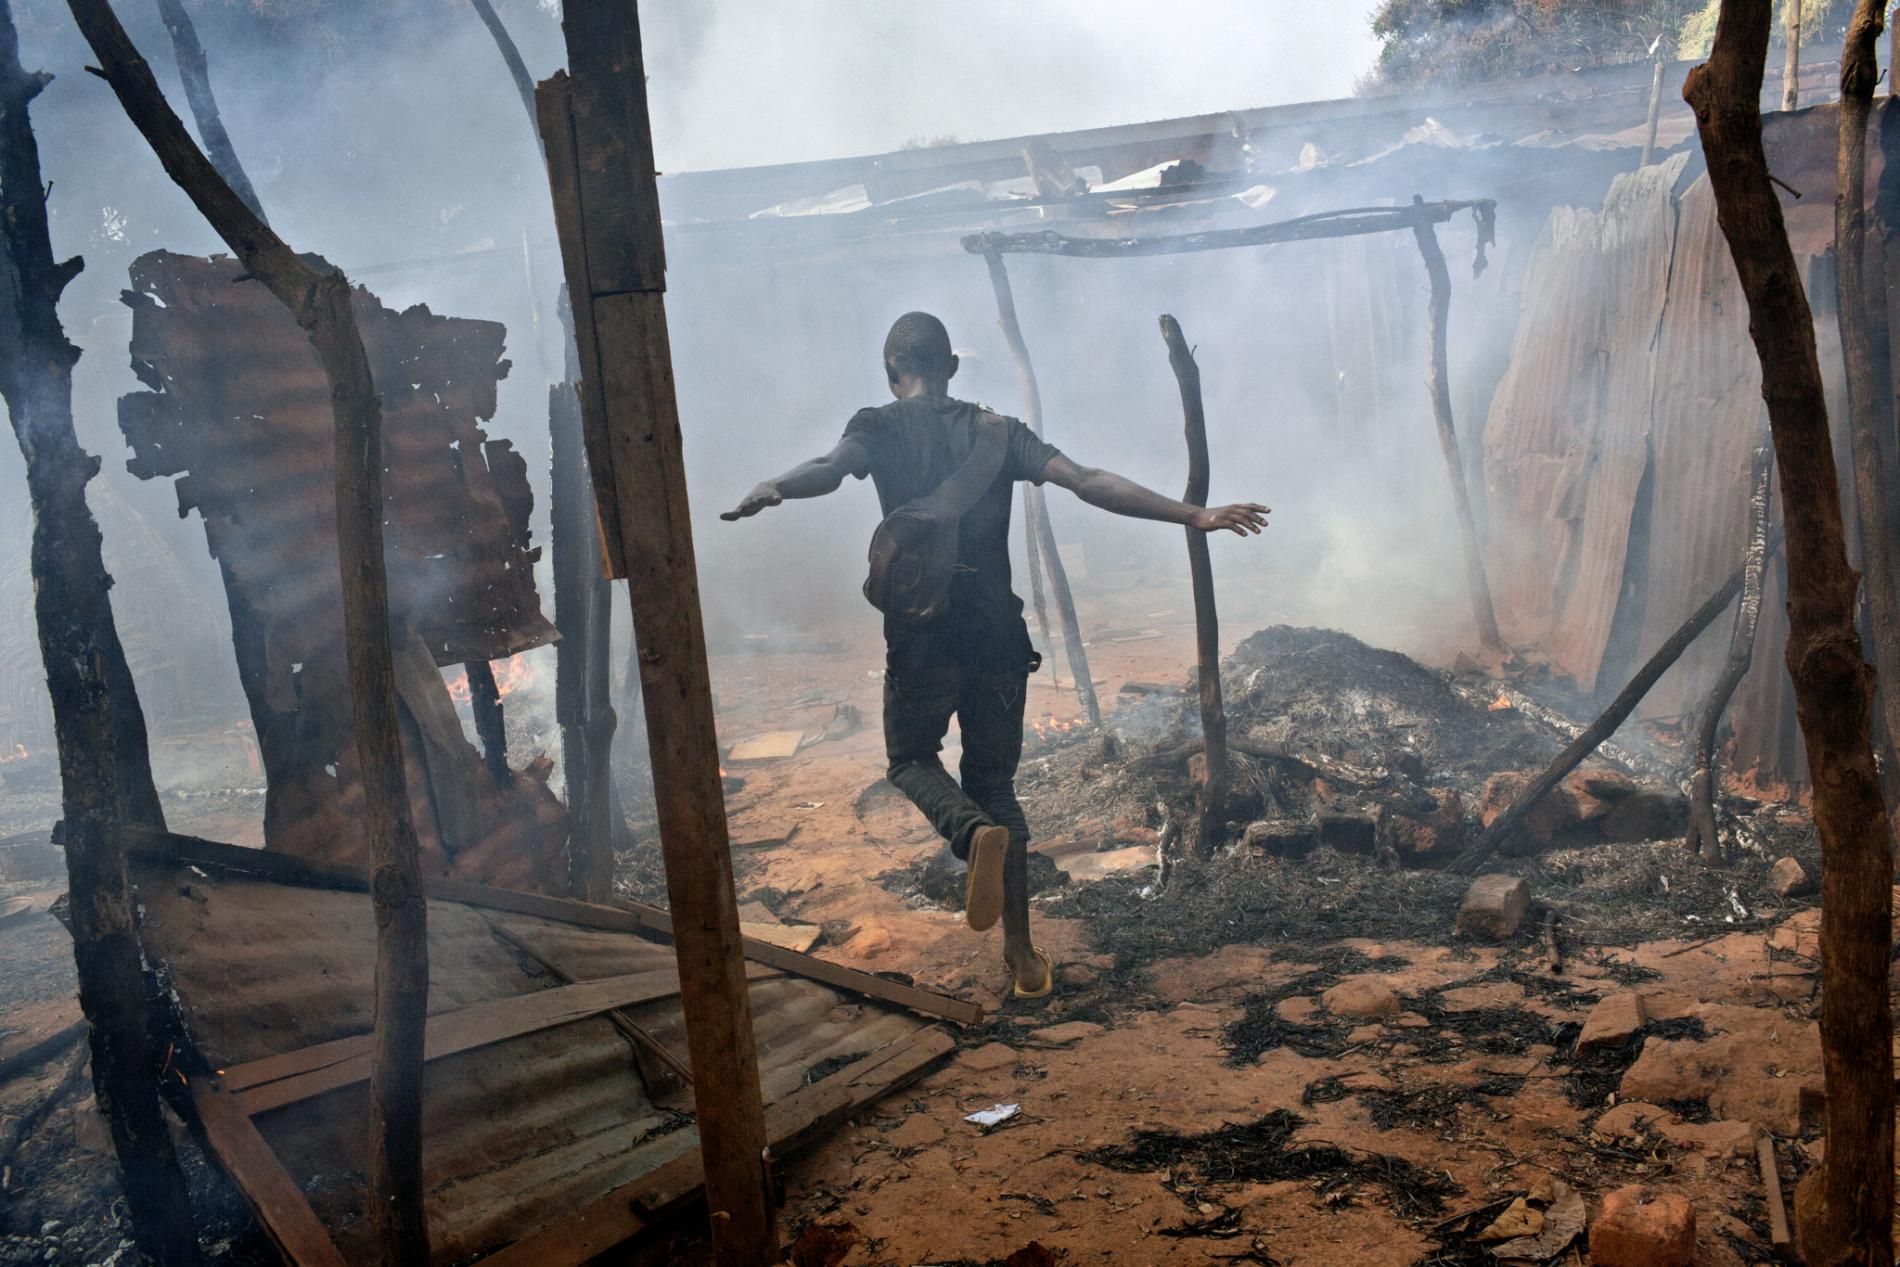 A neighborhood in the capital, Bangui, smolders in 2014 after Christian-led militias attacked predominantly Muslim rebels who had ousted the government. The faiths once coexisted in relative peace, but chaos has reigned in much of the nation for the past four years. Image by Marcus Bleasdale. Central African Republic. 